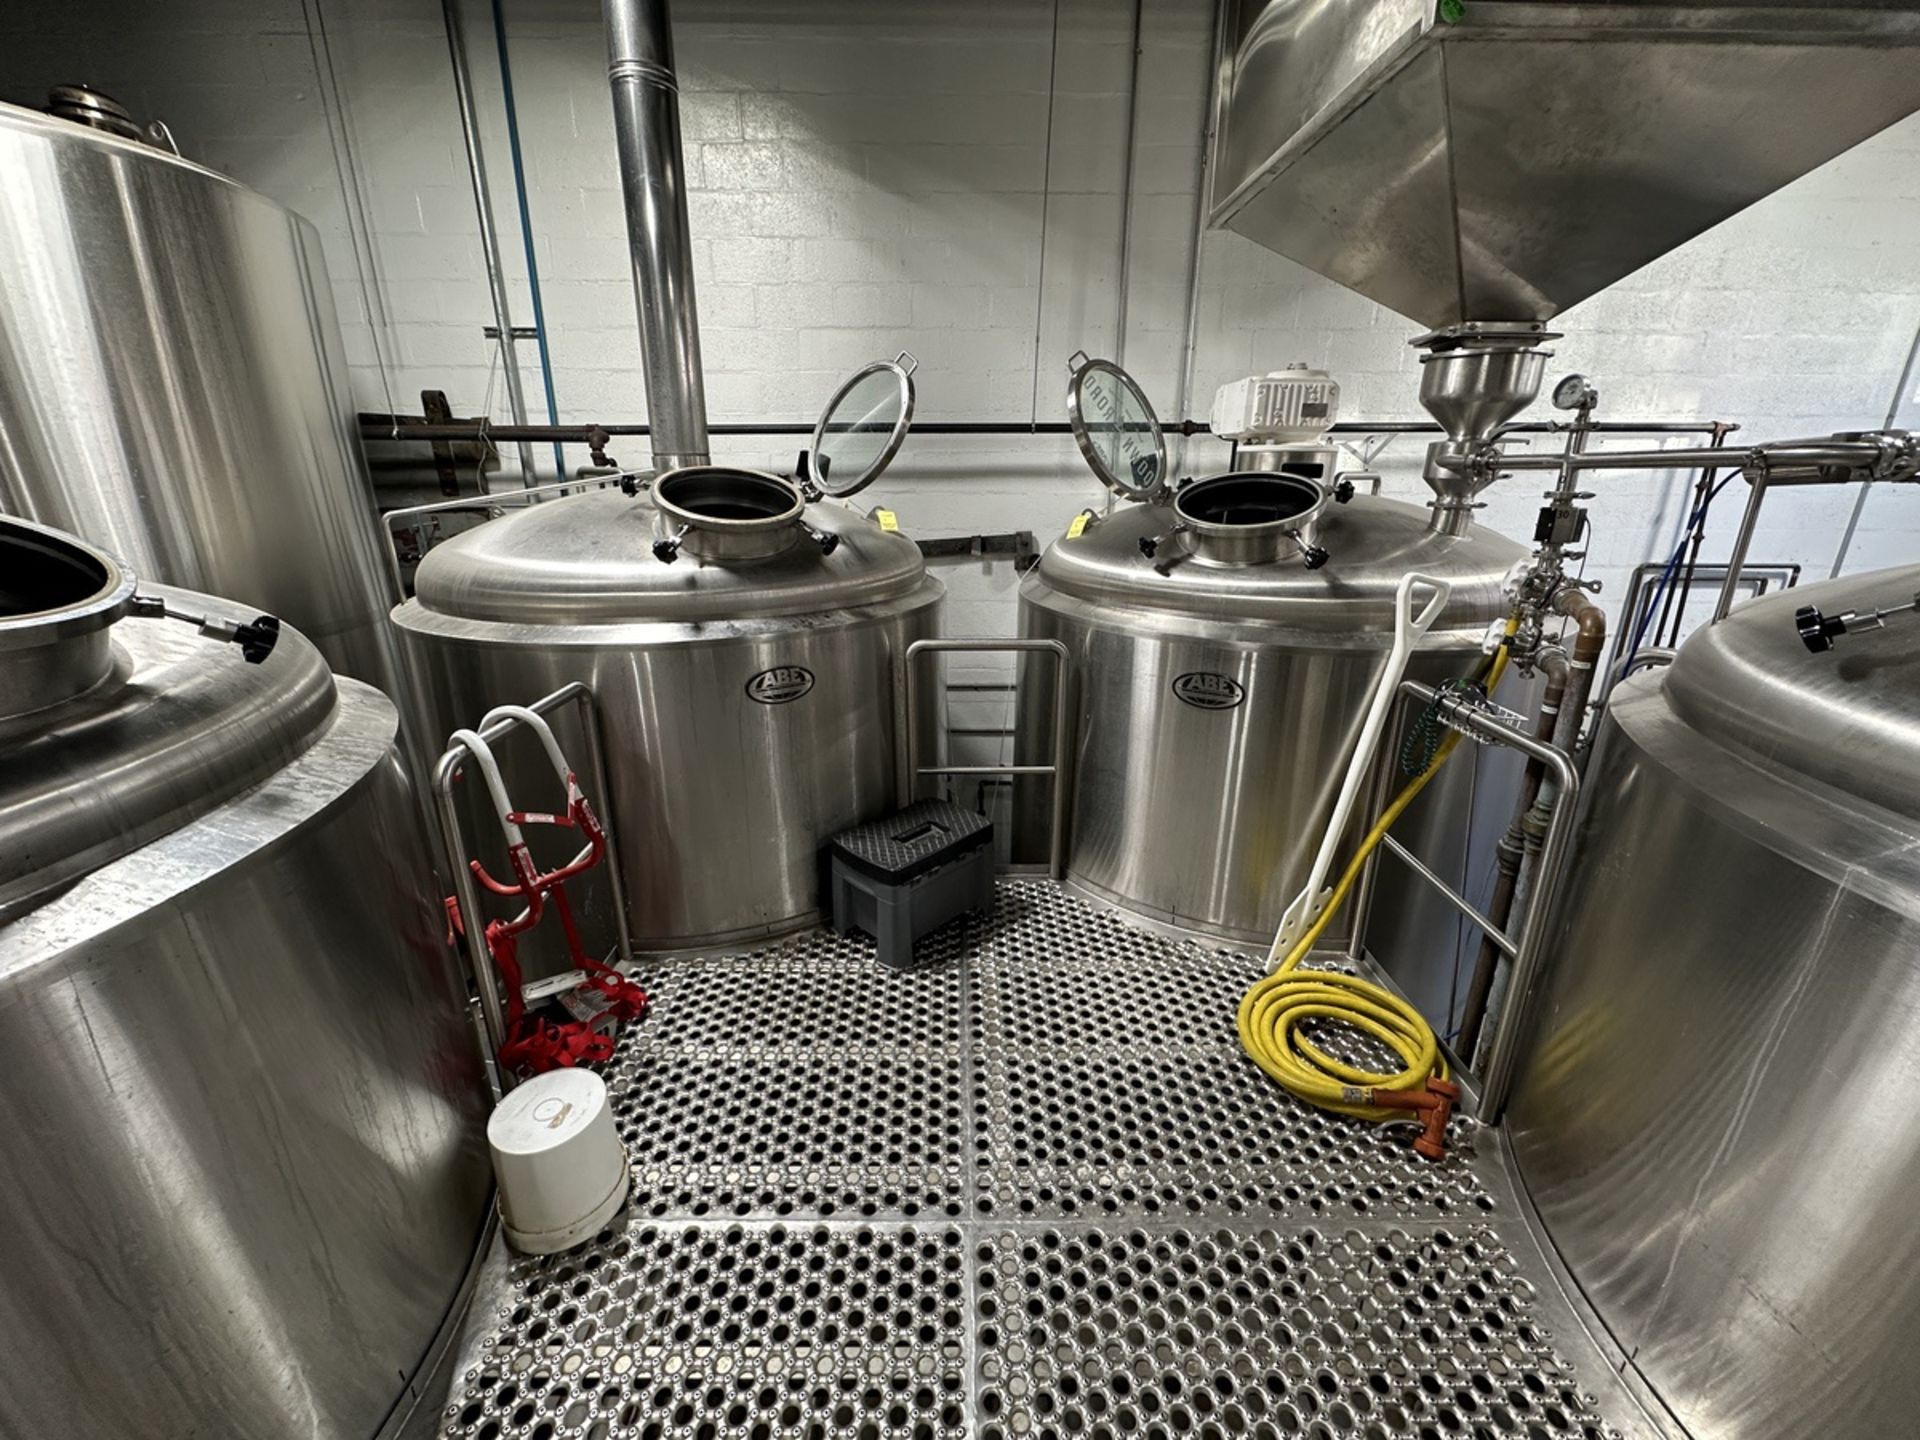 2016 ABE 30 BBL 4-Vessel Brewhouse - Brew Kettle, Mash Tun, Lauter Tun & Whirlpool Including Control - Image 2 of 11